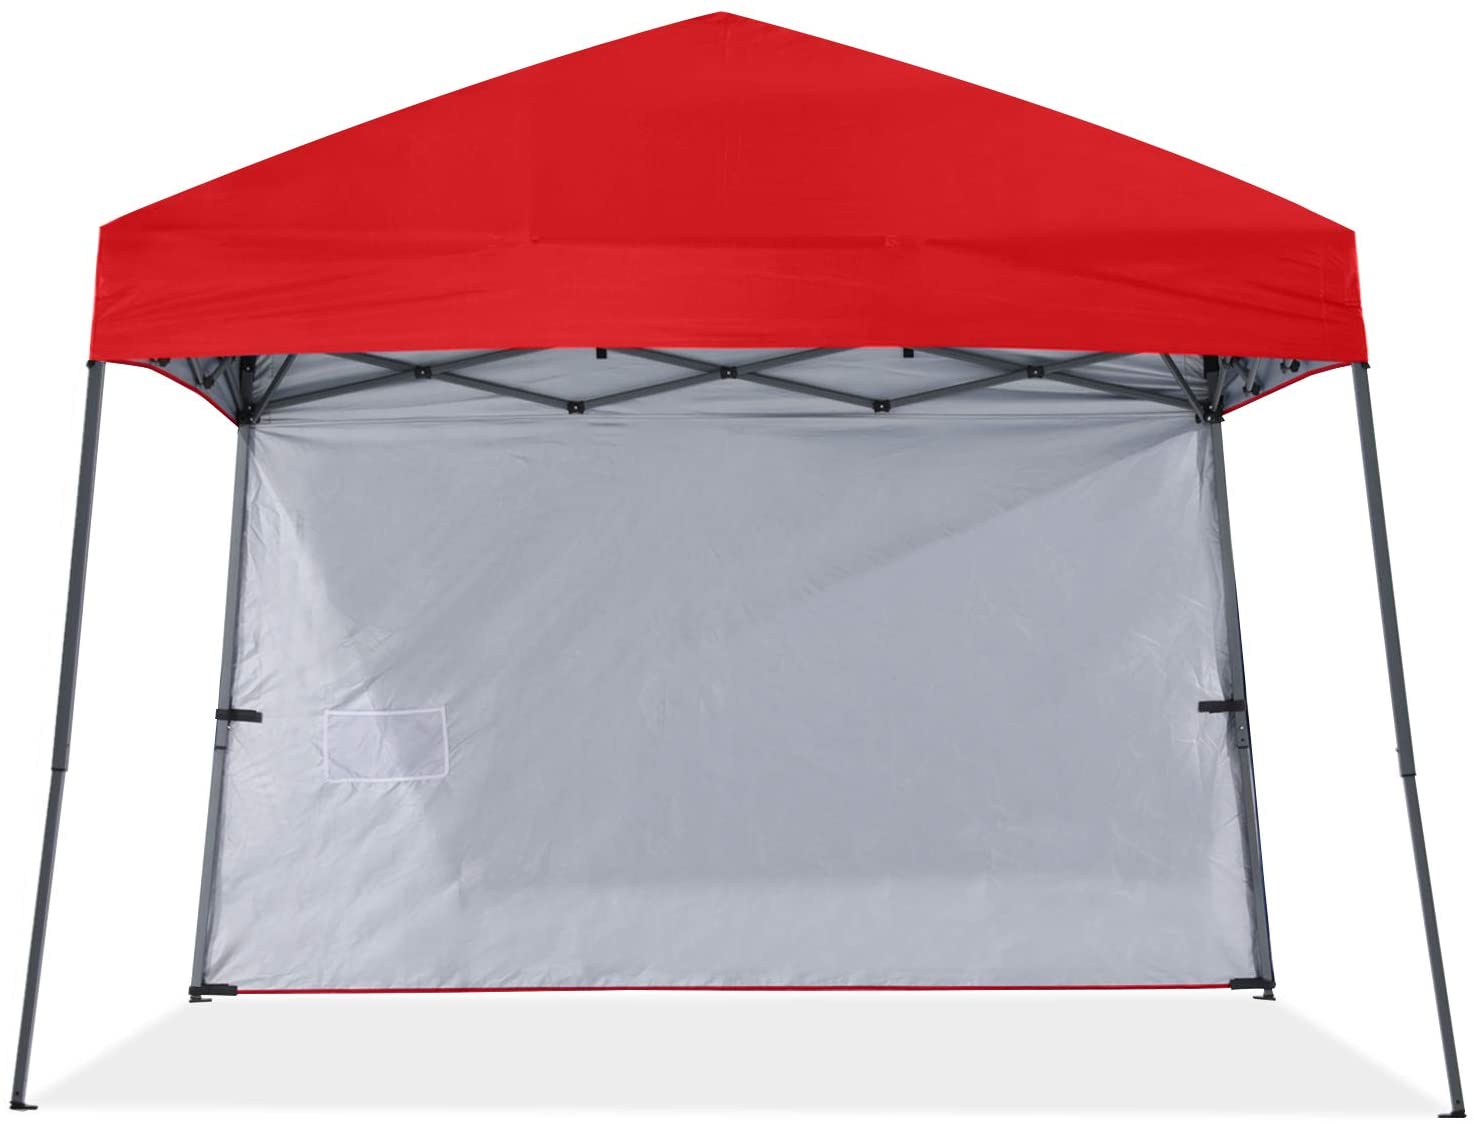 ABCCANOPY 8 ft x 8 ft Outdoor Pop up Slant Leg Canopy Tent with 1 Sun Wall and 1 Backpack Bag - Red